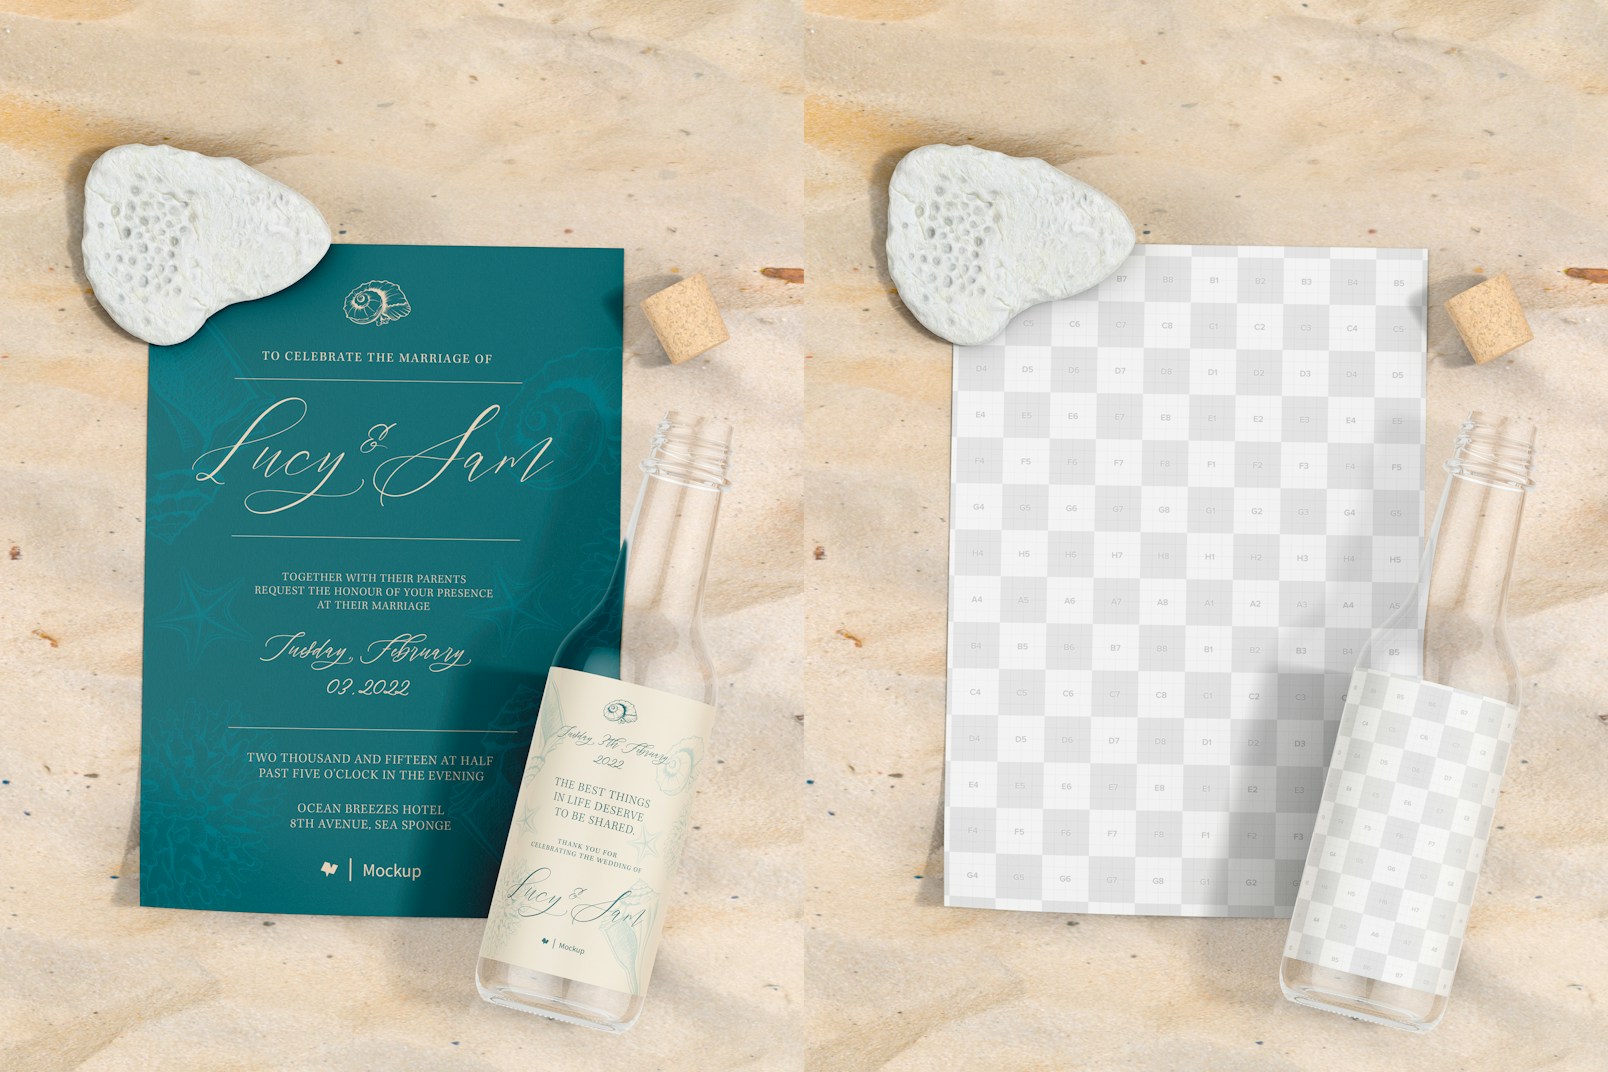 Wedding Invitation in a Bottle Mockup, Top View